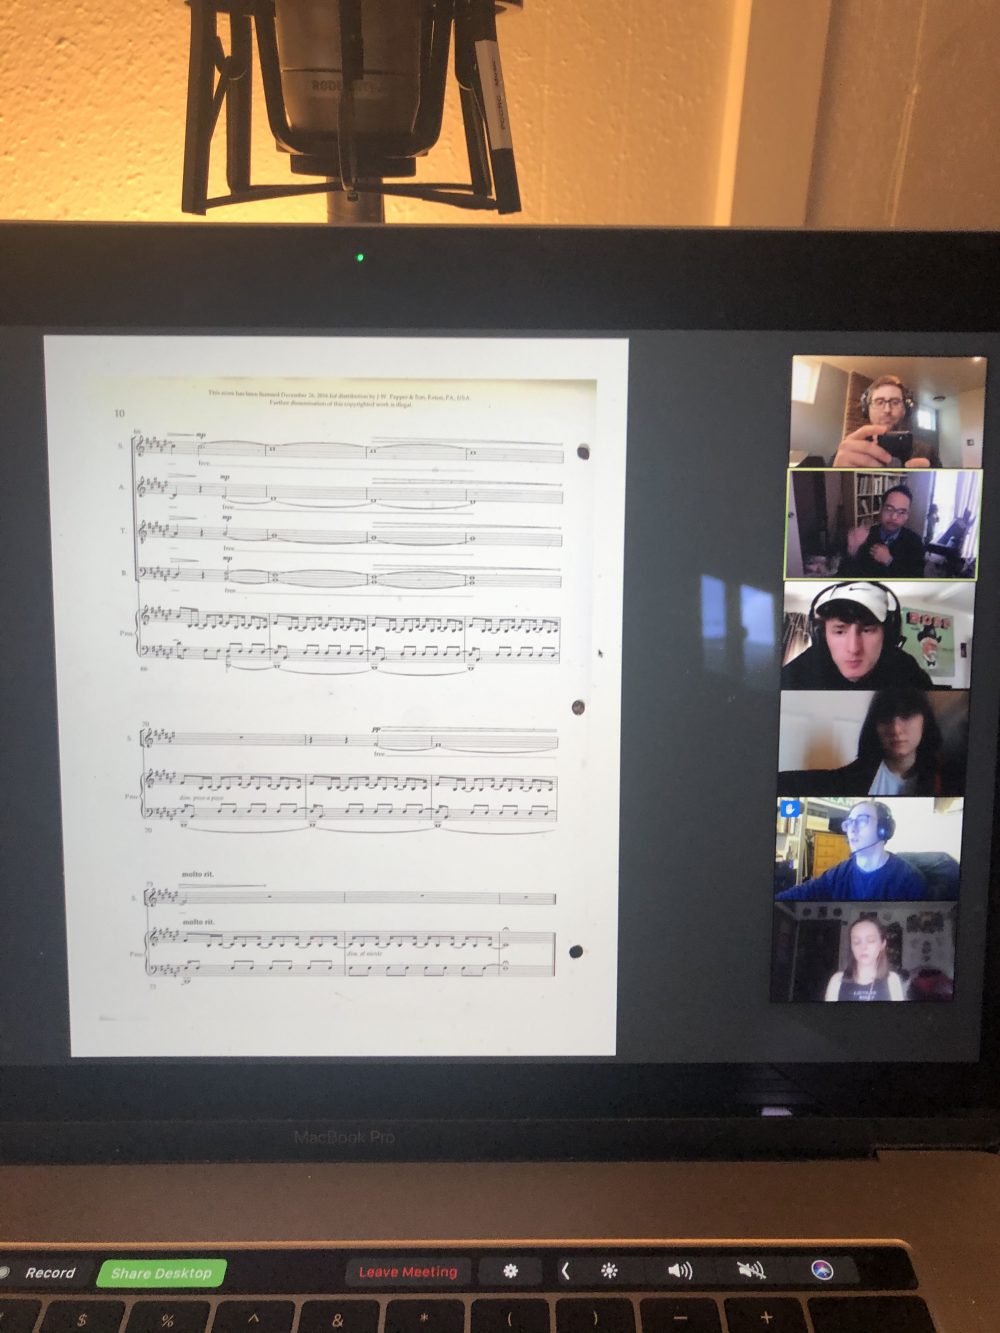 screenshot of sheet music and students in a video meeting